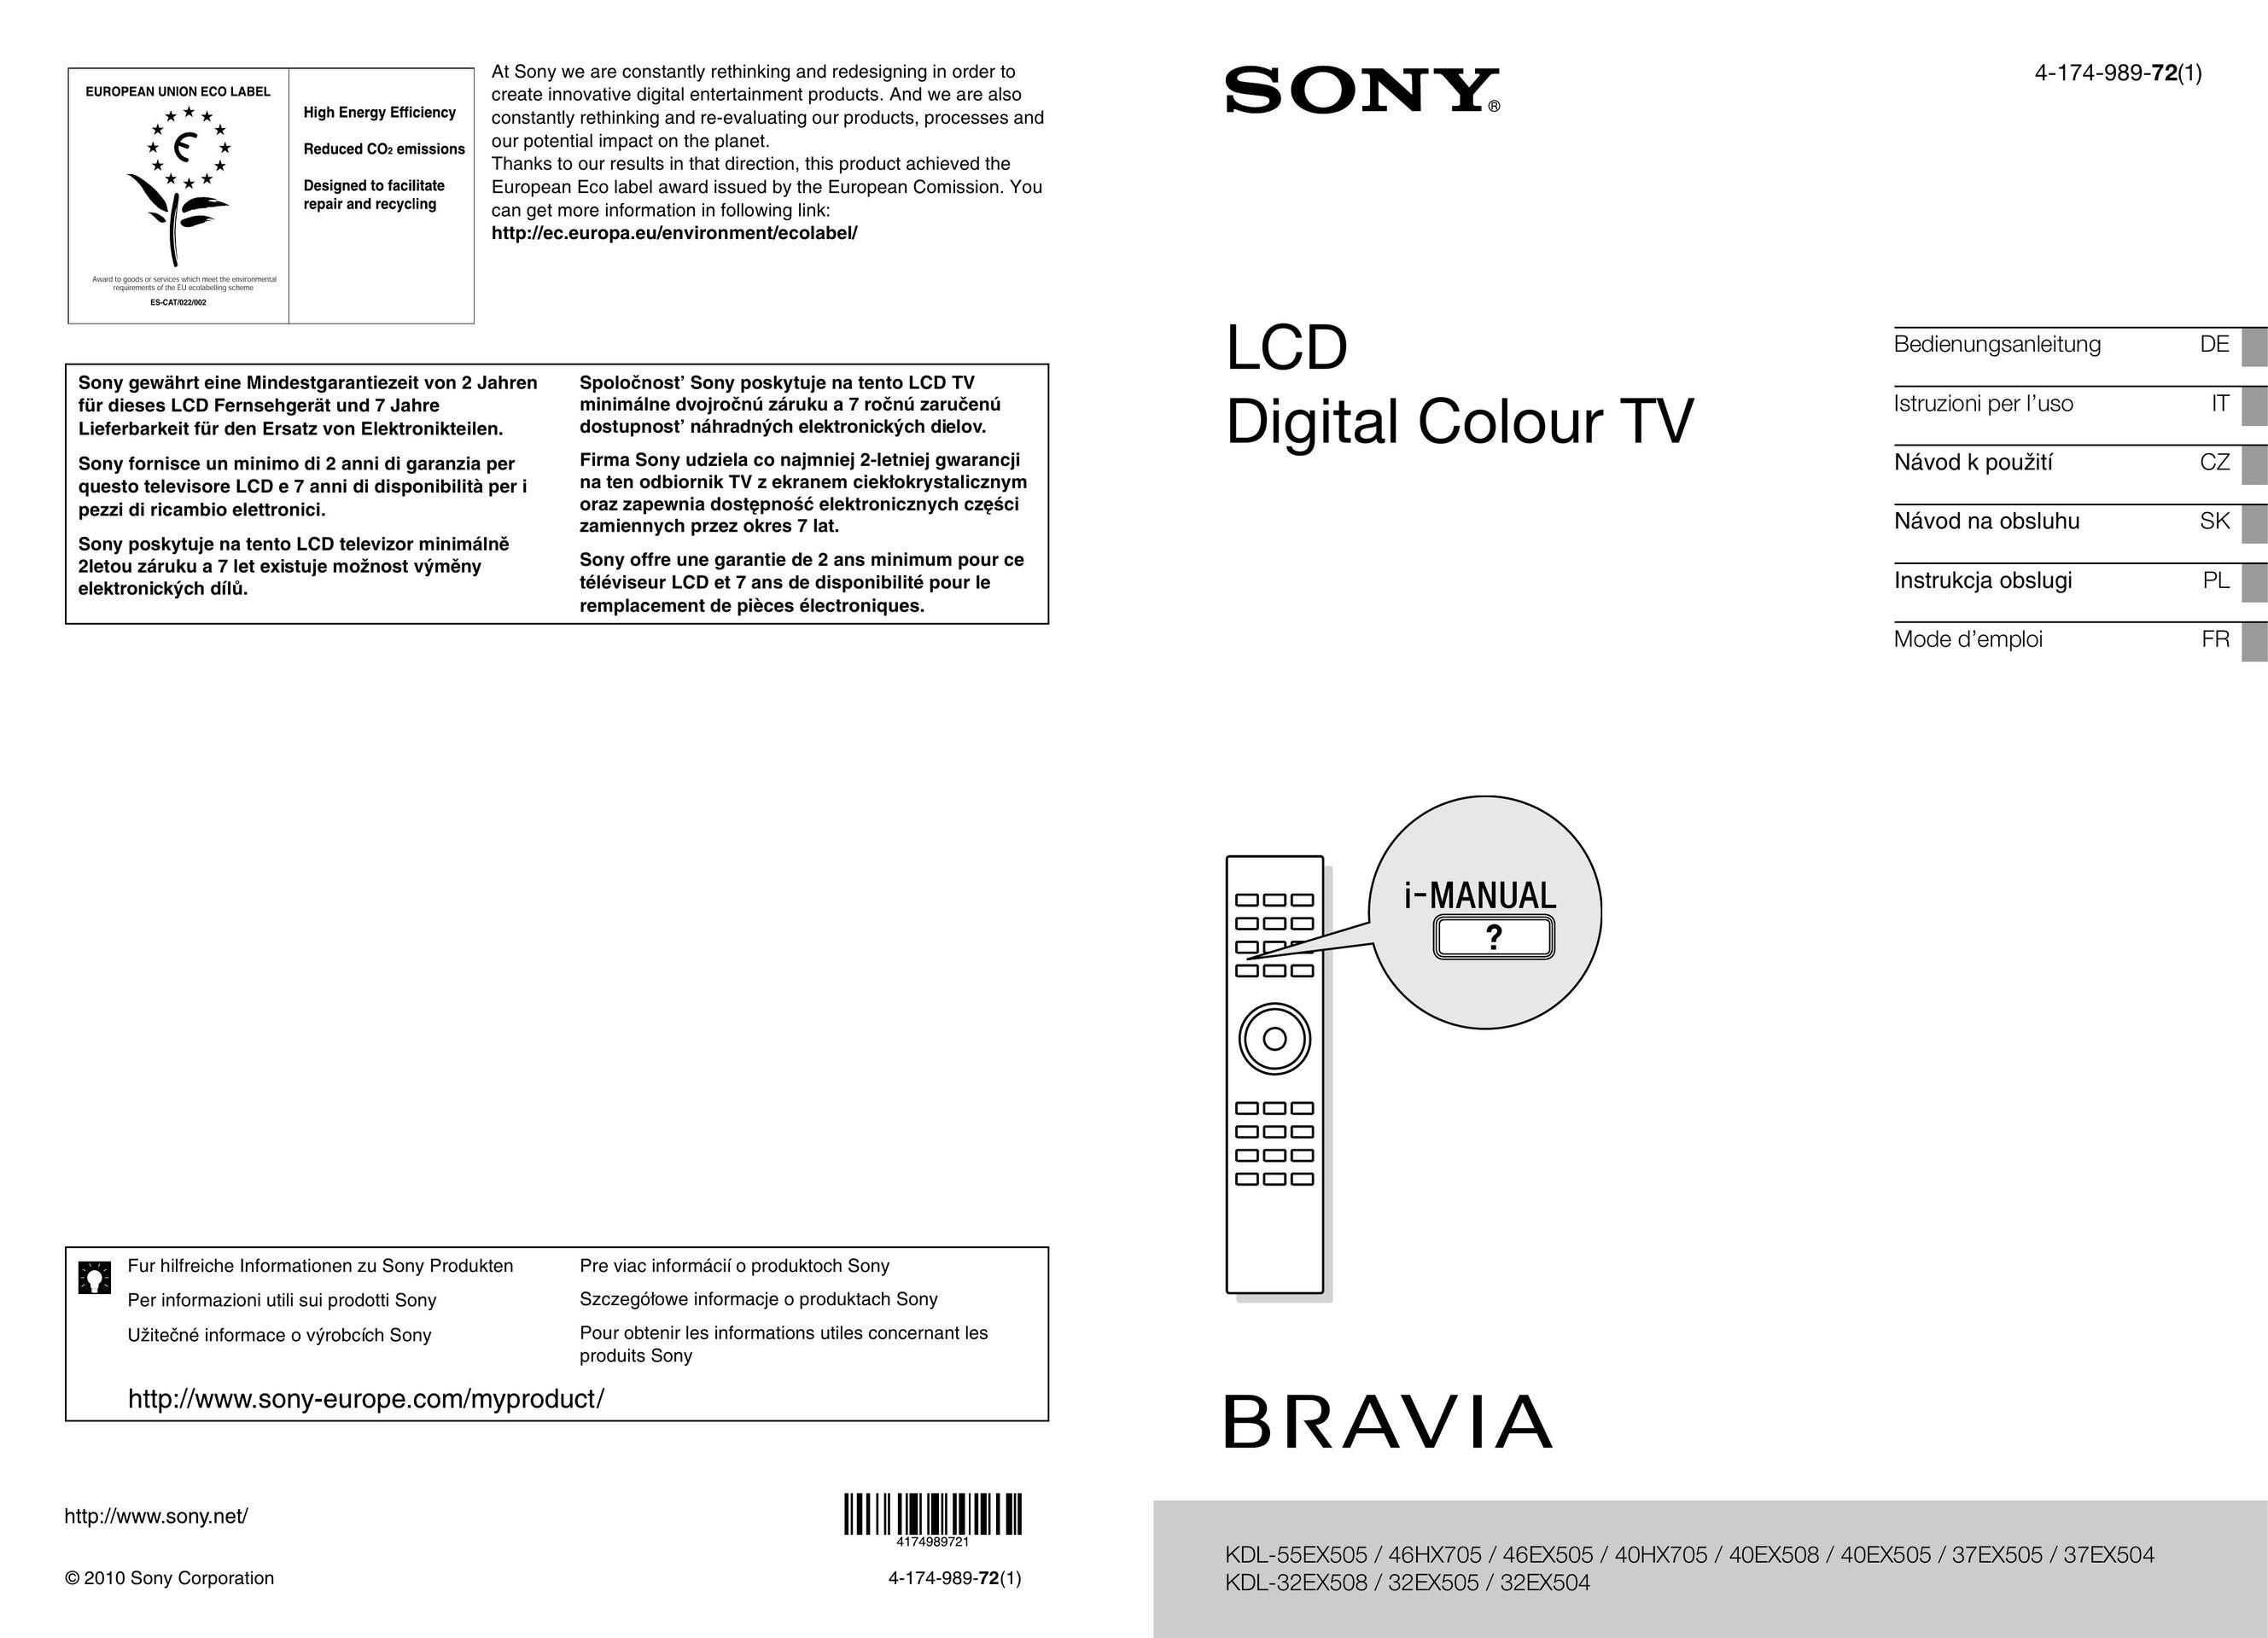 Sony 32EX504 CRT Television User Manual